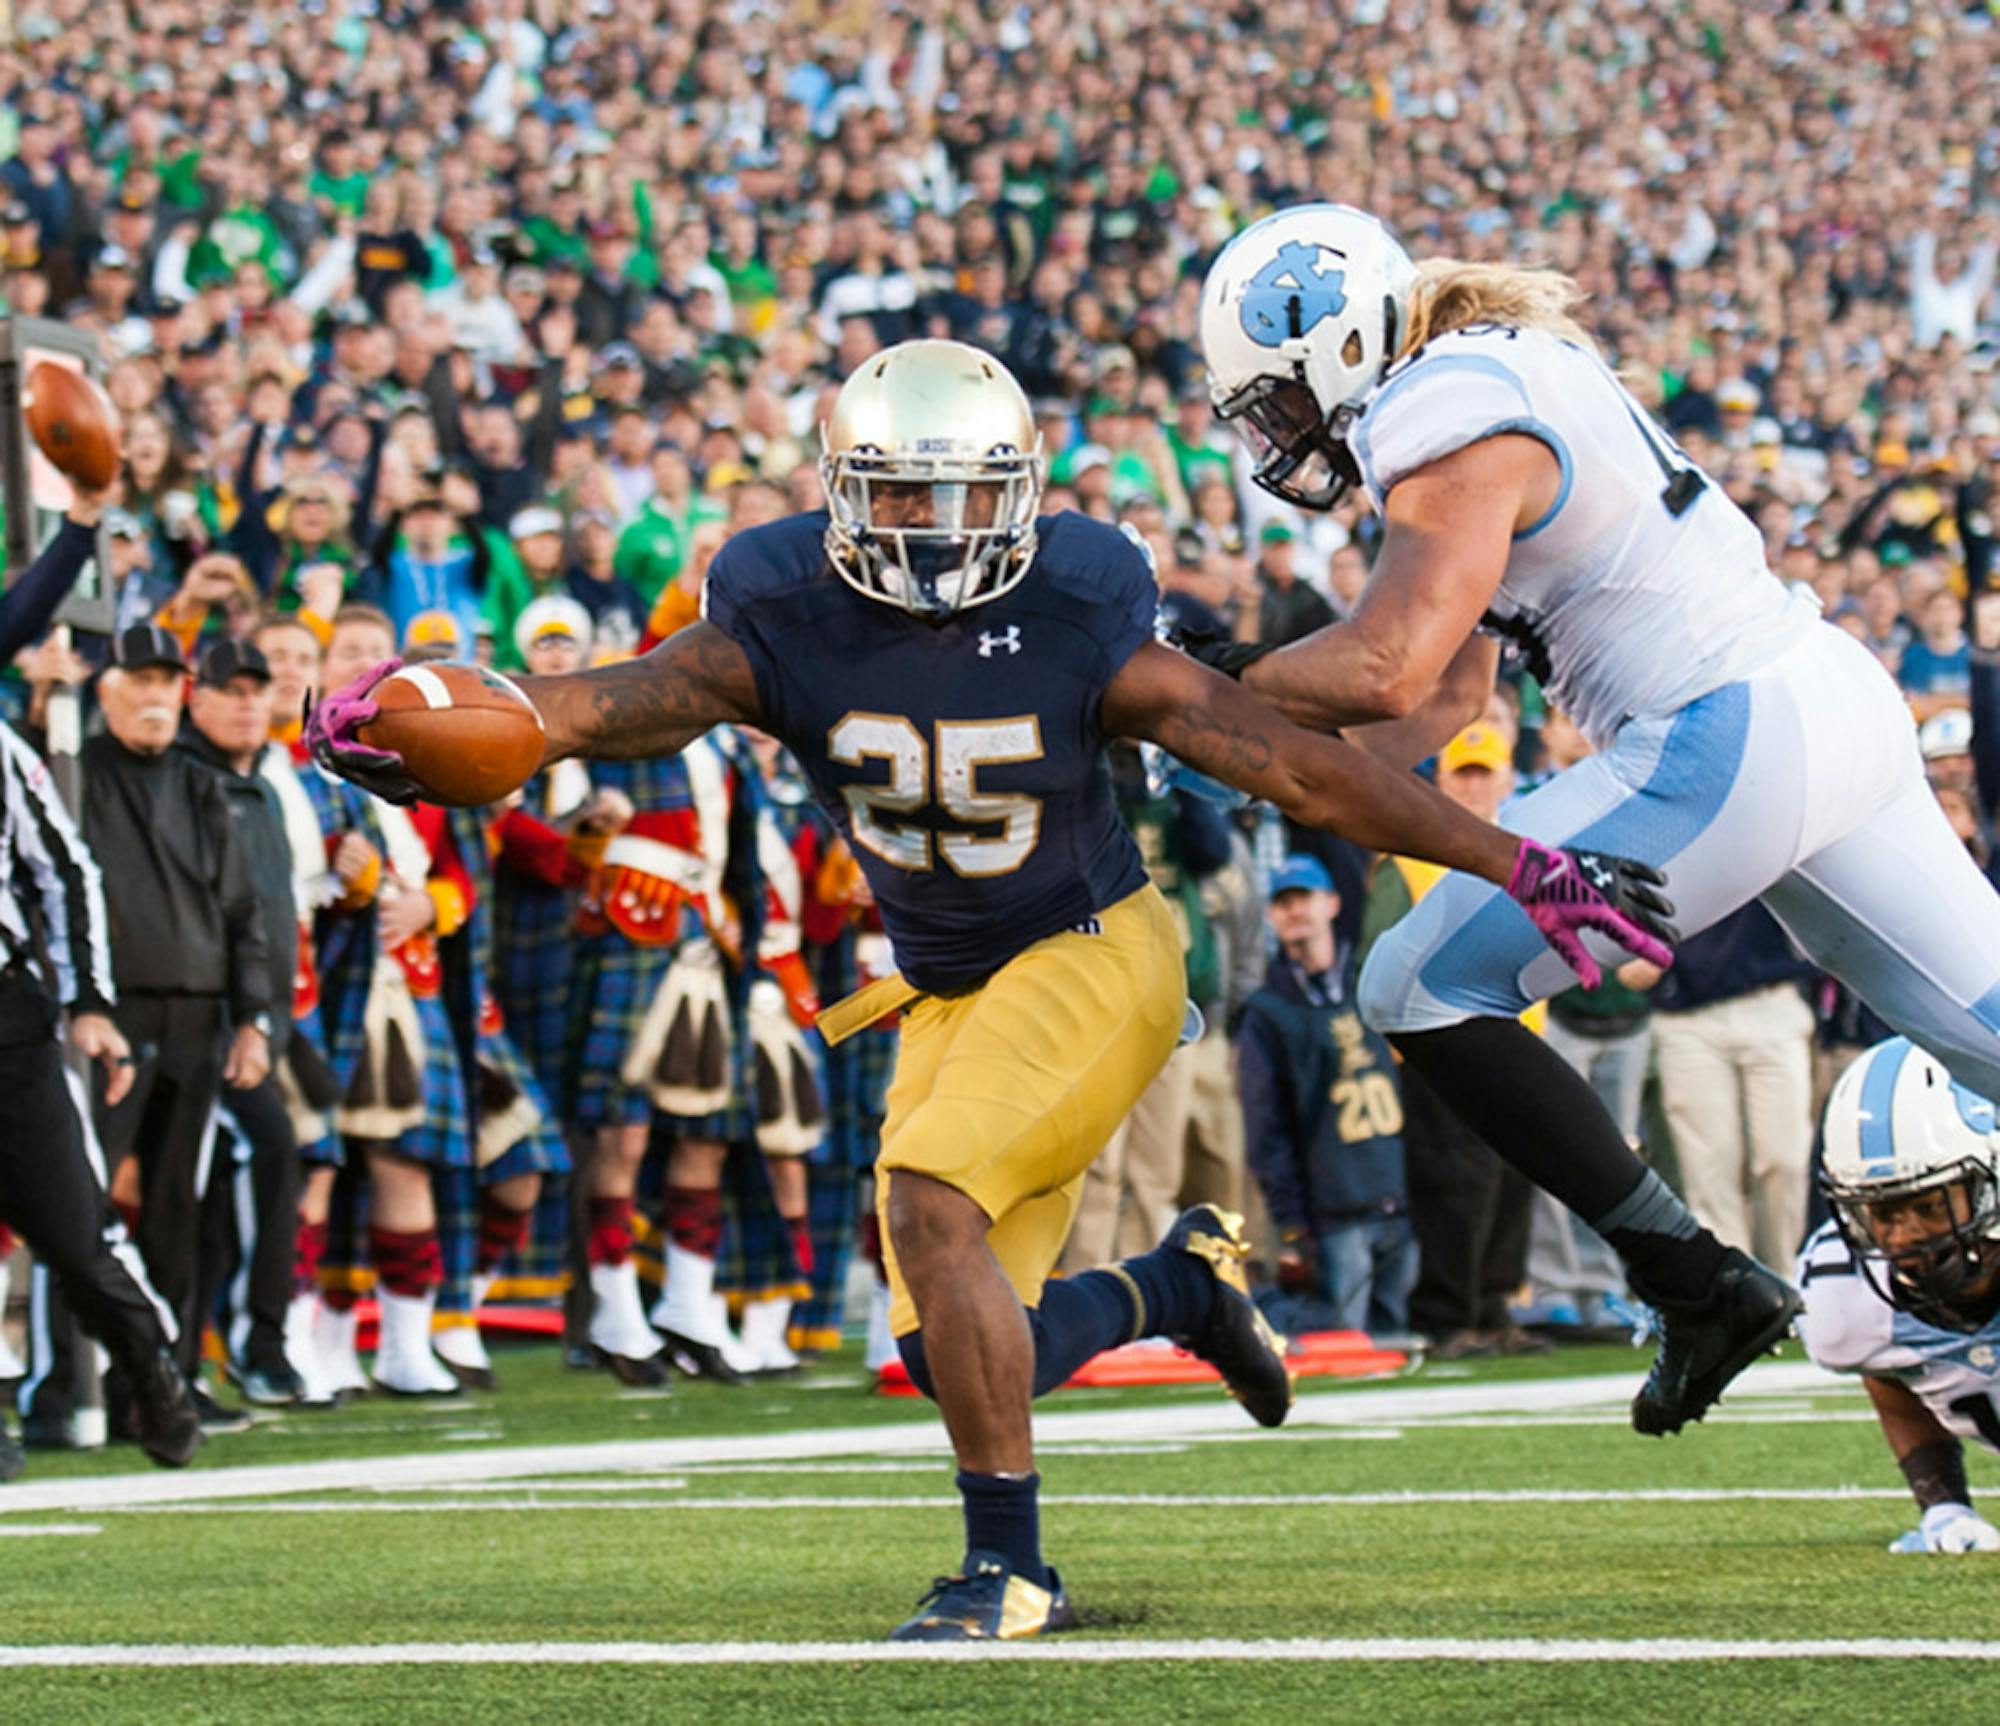 Irish sophomore running back Tarean Folston extends for one of his three touchdowns during Notre Dame’s 50-43 victory over North Carolina on Saturday at Notre Dame Stadium.